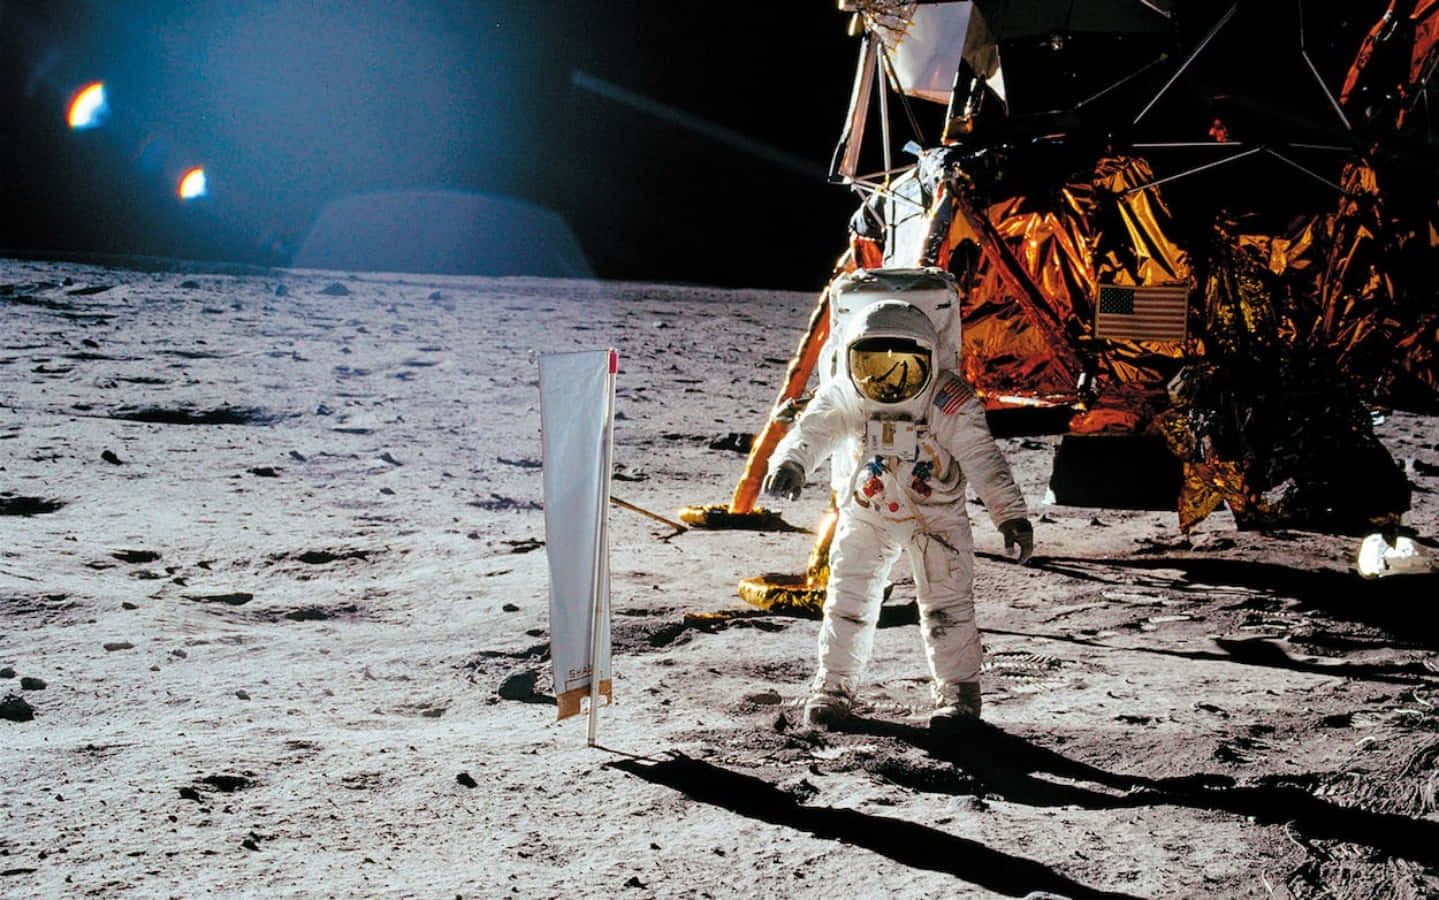 A Man In A Space Suit Standing On The Moon